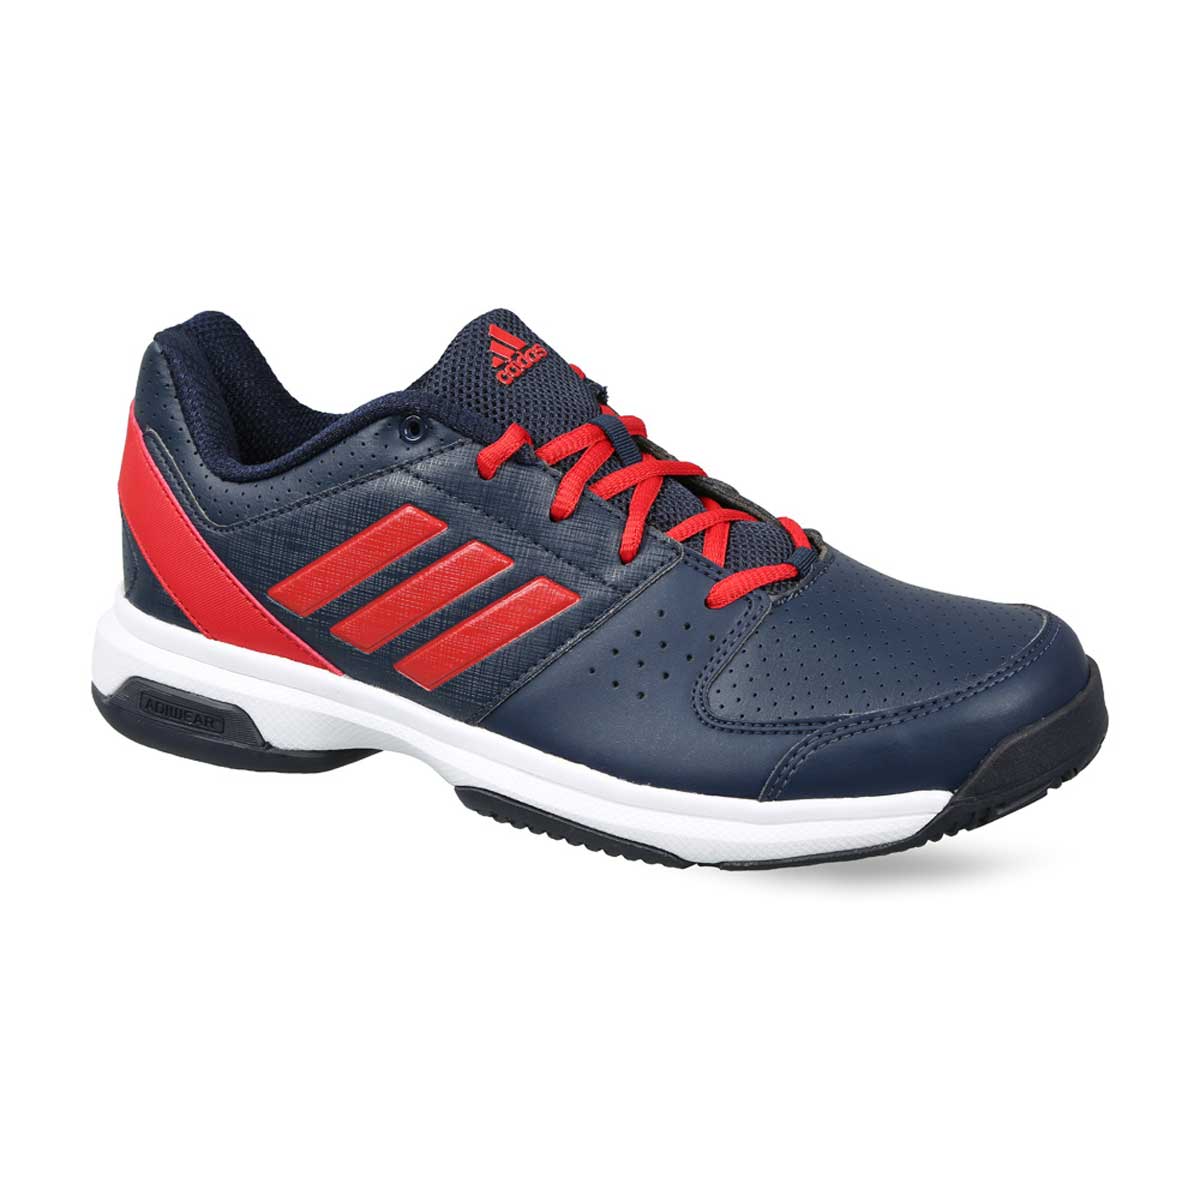 Buy Adidas Hase Tennis Shoes (Navy/Red) Online in India